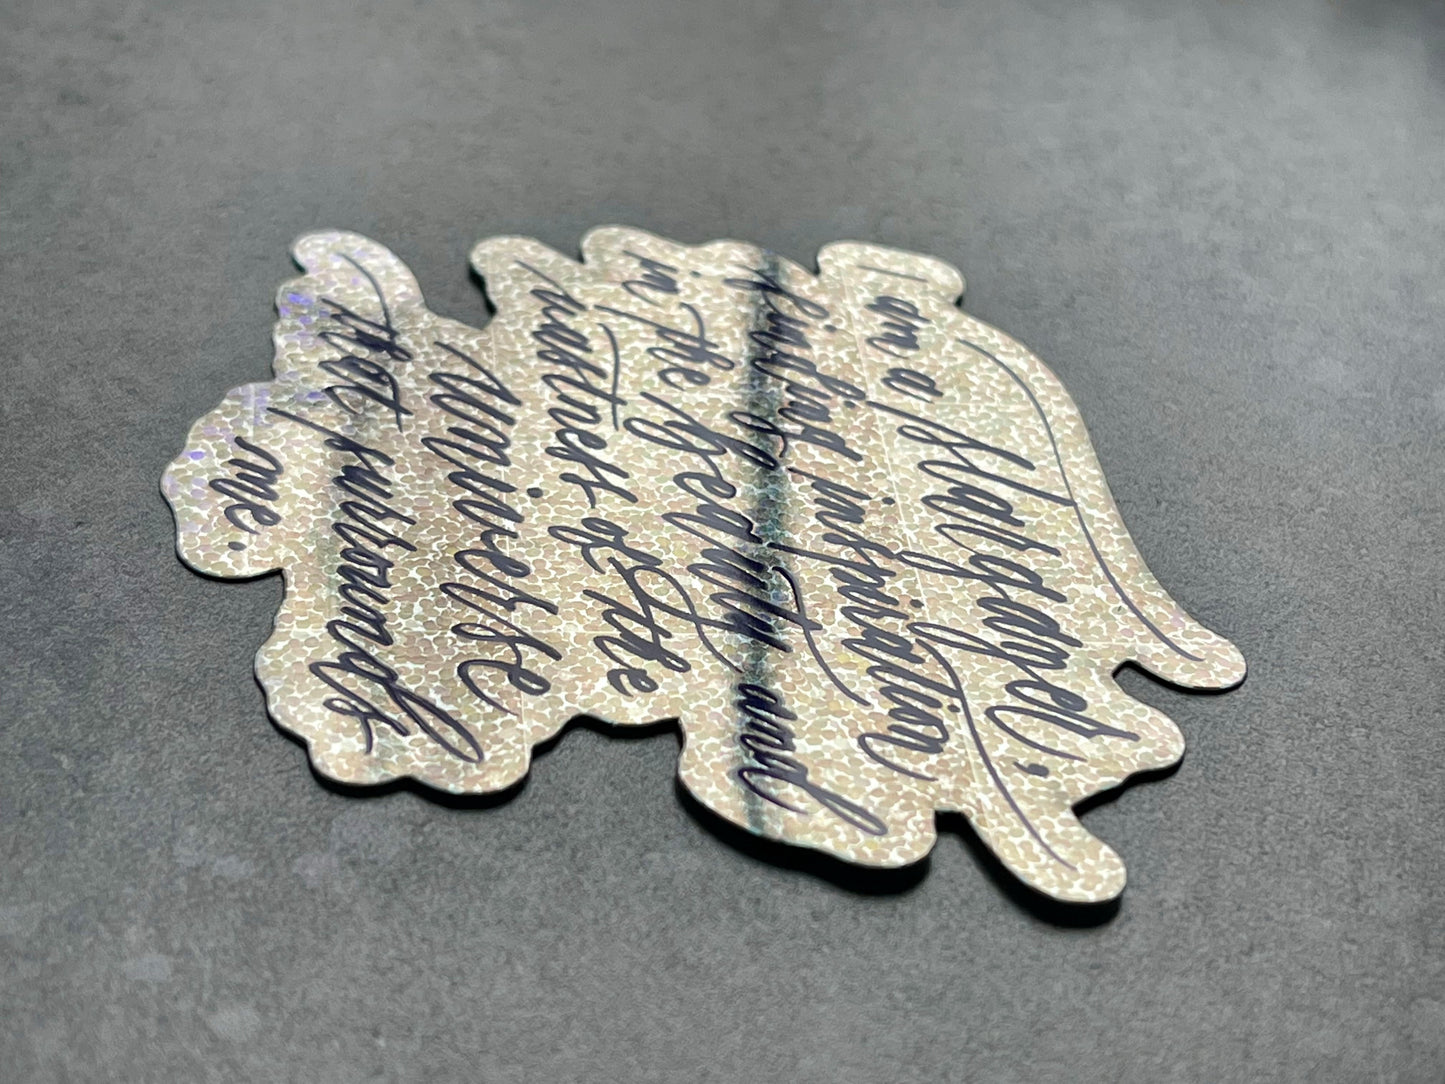 I am a stargazer finding inspiration in the beauty and vastness of the universe that surrounds me script calligraphy glitter sticker in shiny side view laid down to show sticker side view